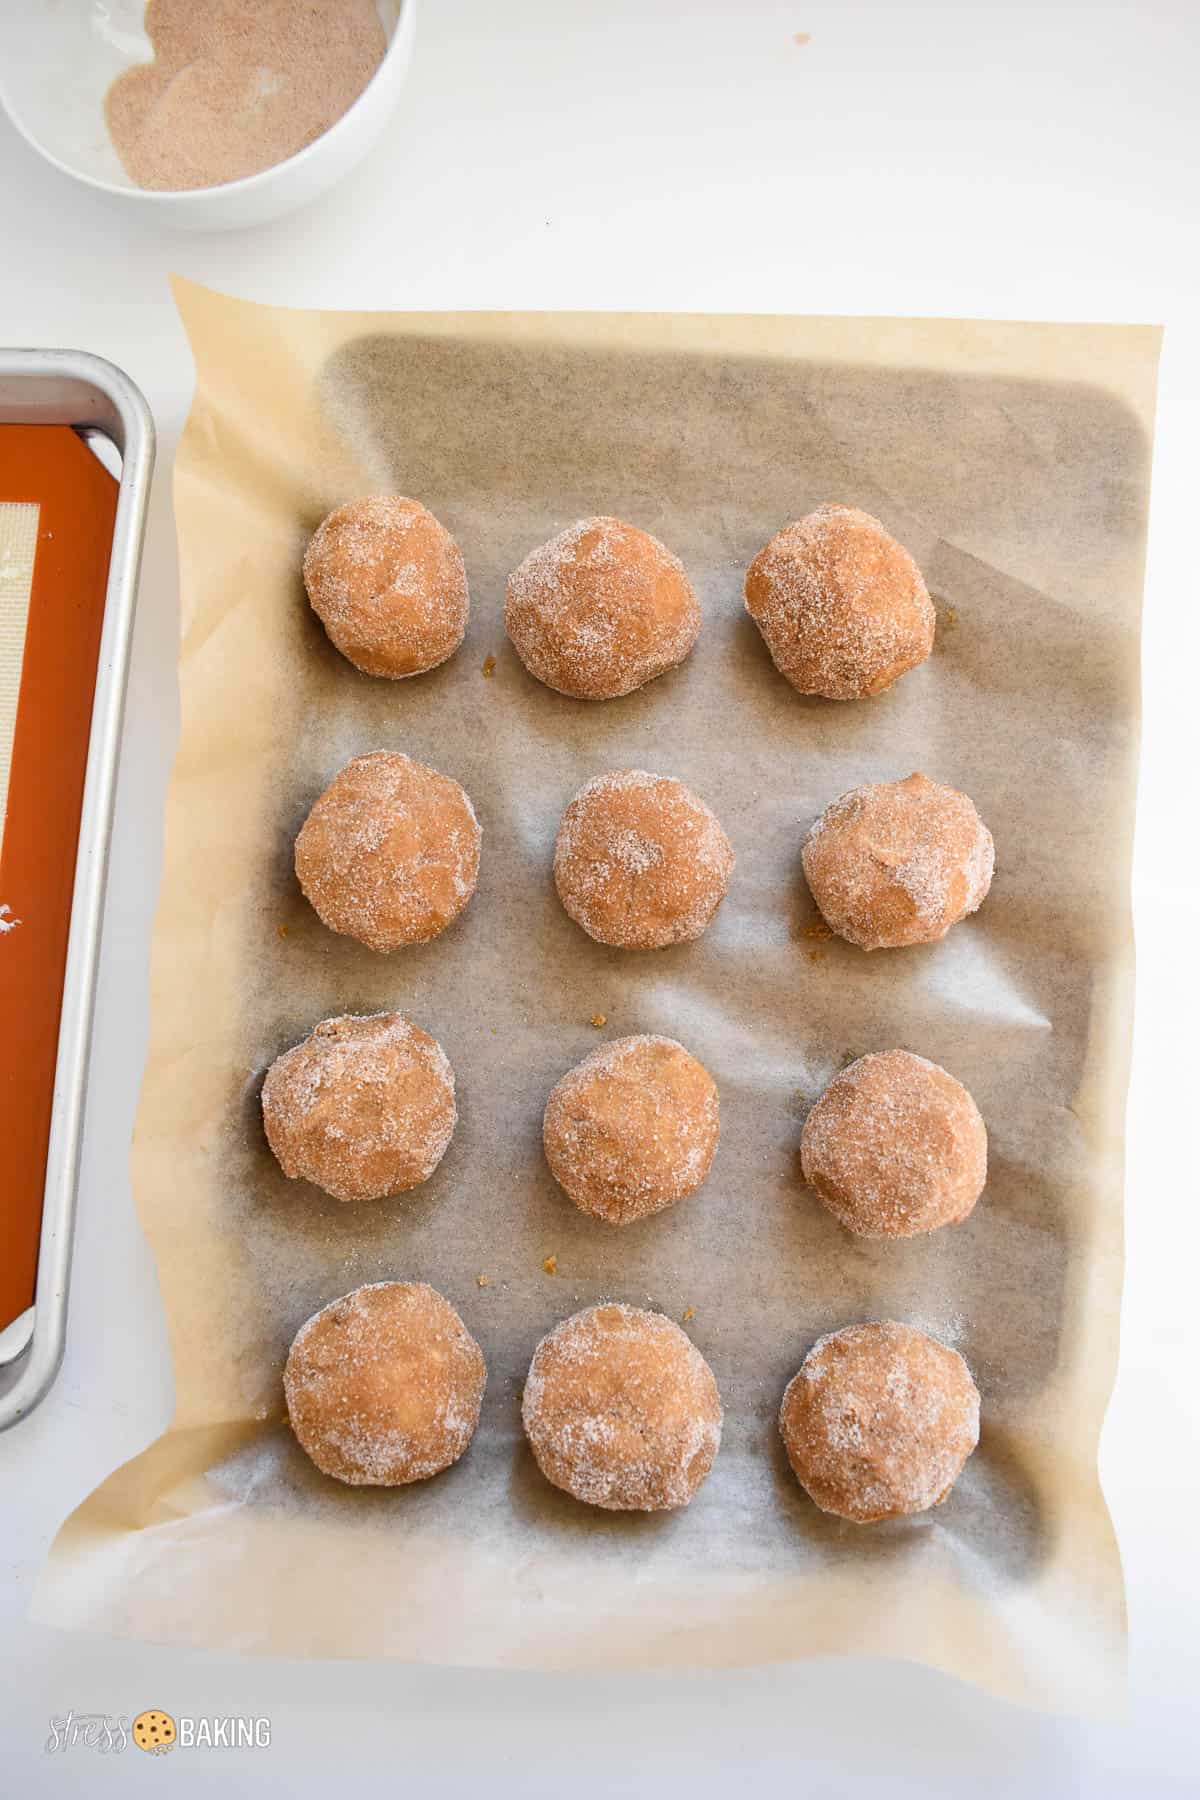 Balls of gingerbread dough coated in sugar on parchment paper